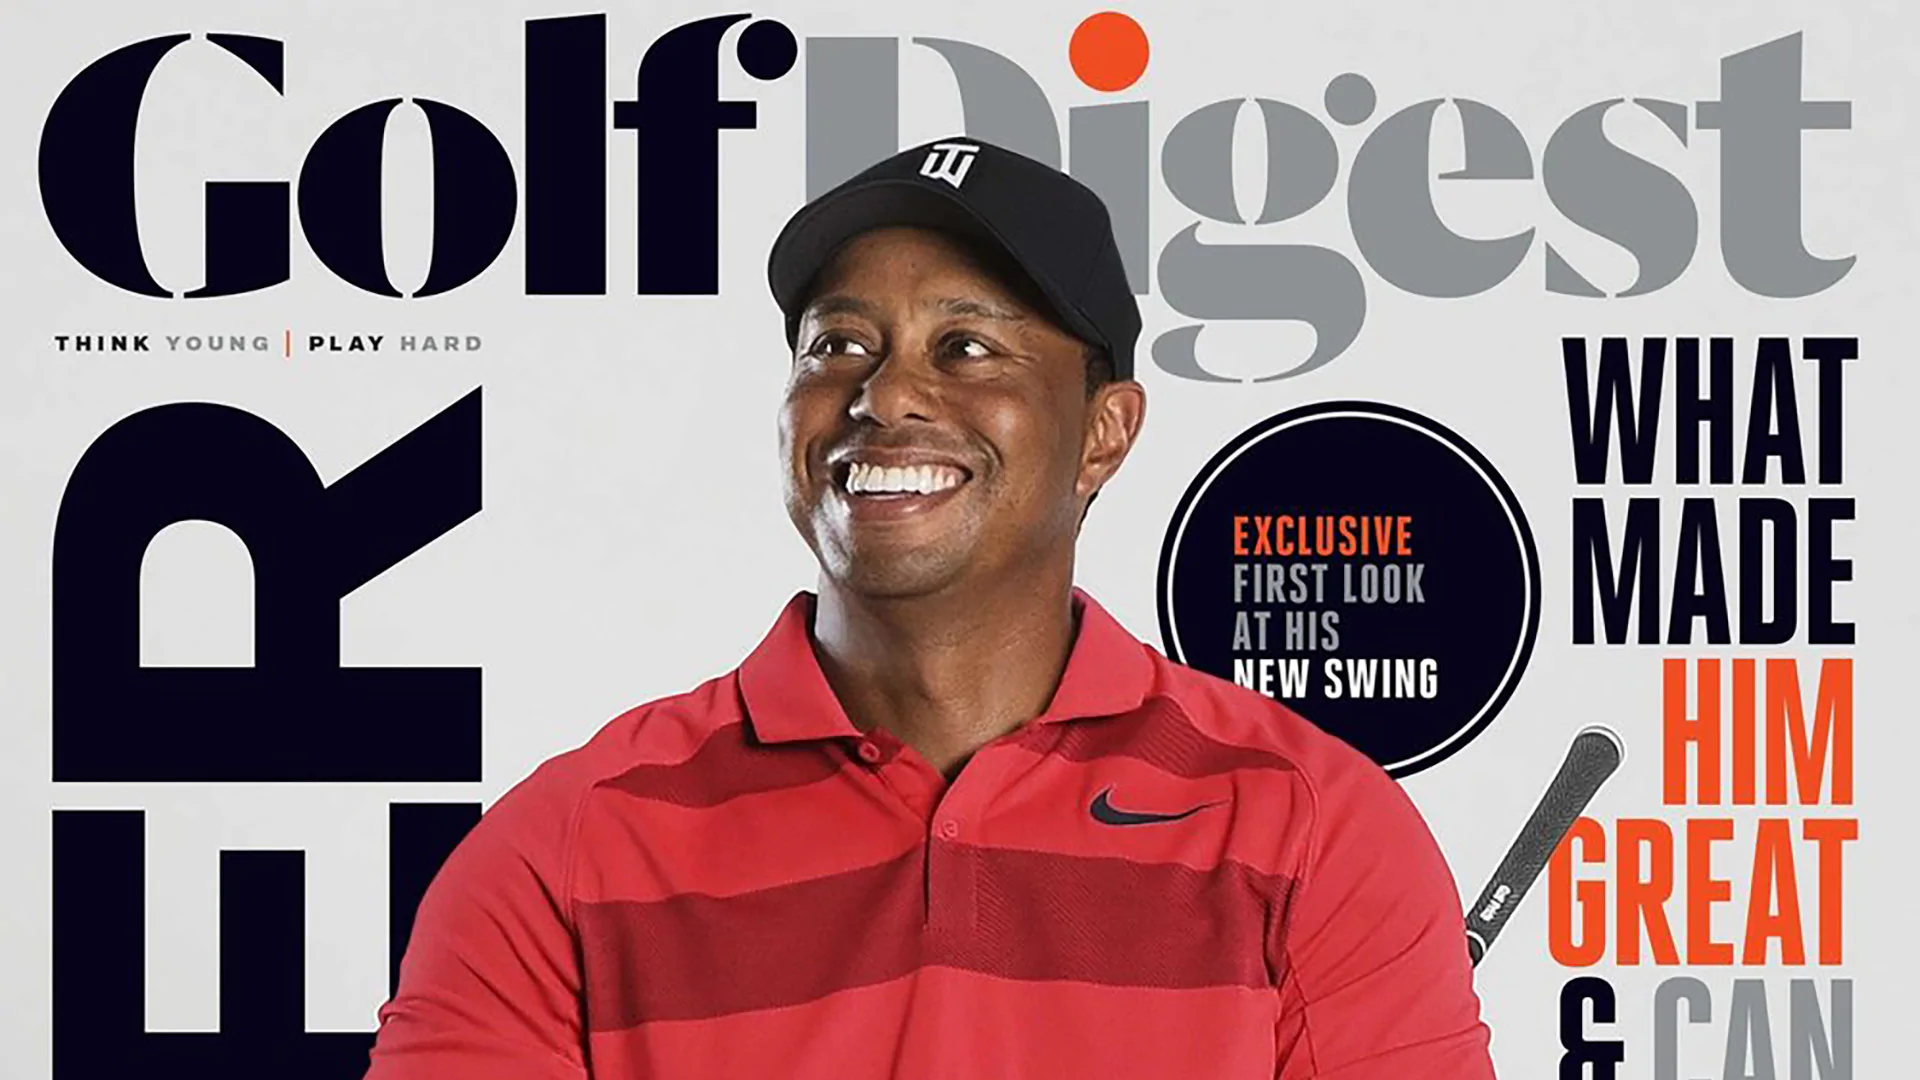 Golf Digest acquired by Discovery, Inc.